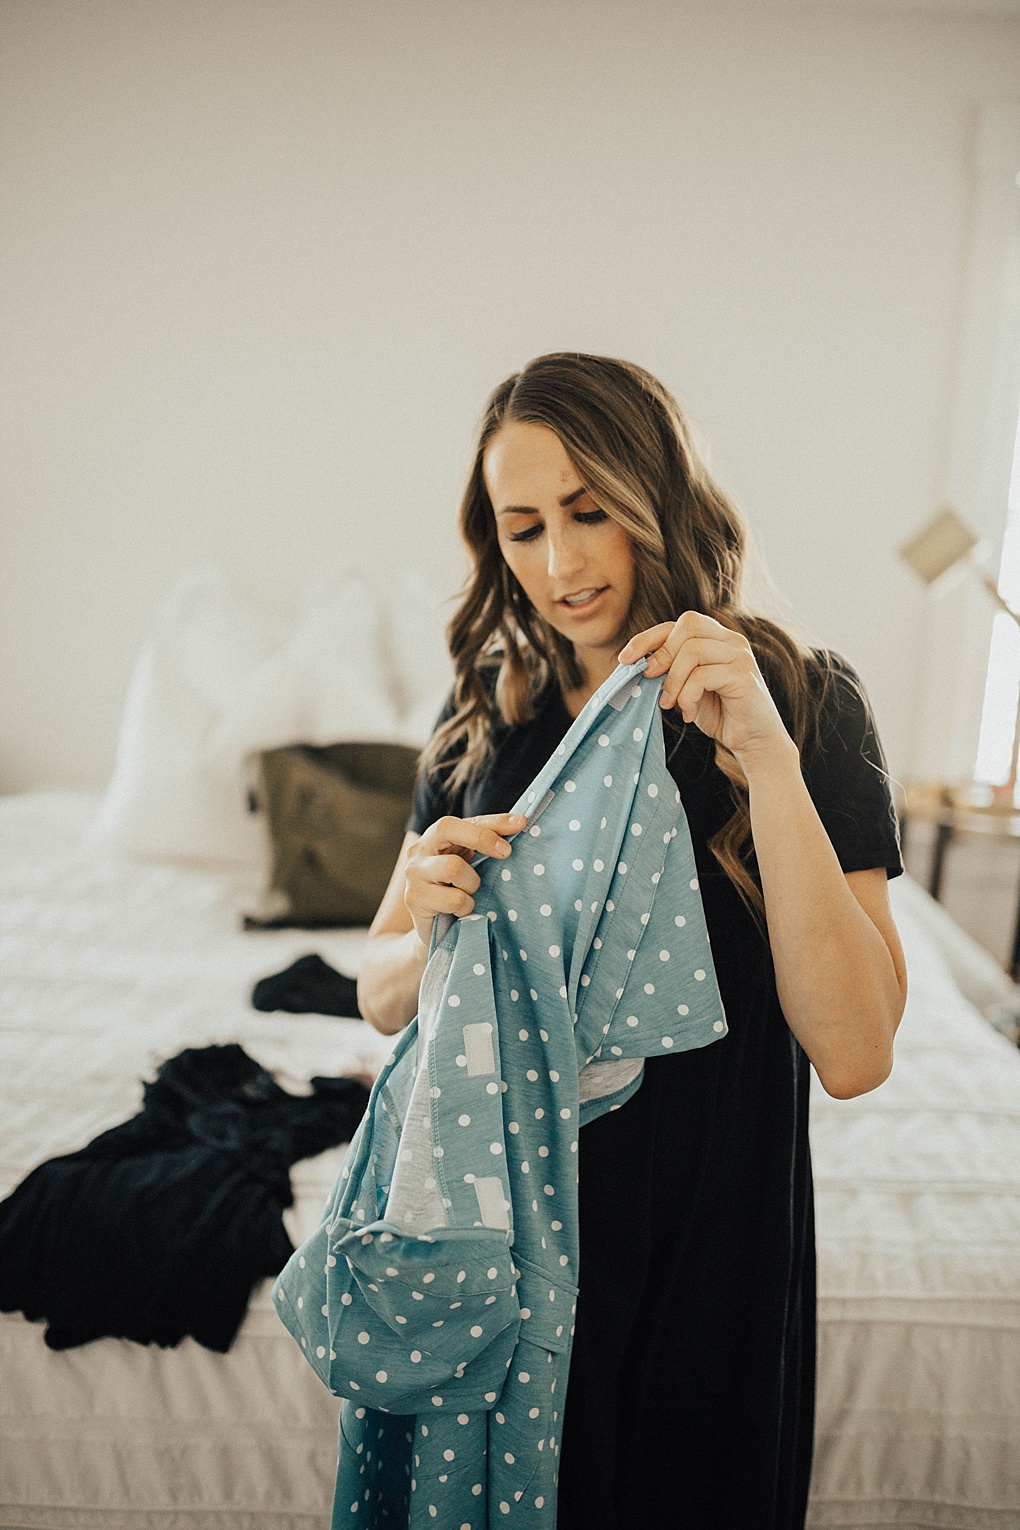 SAVE this post right now! See exactly what Utah Style Blogger Dani Marie is packing in her hospital bag with this pregnancy!